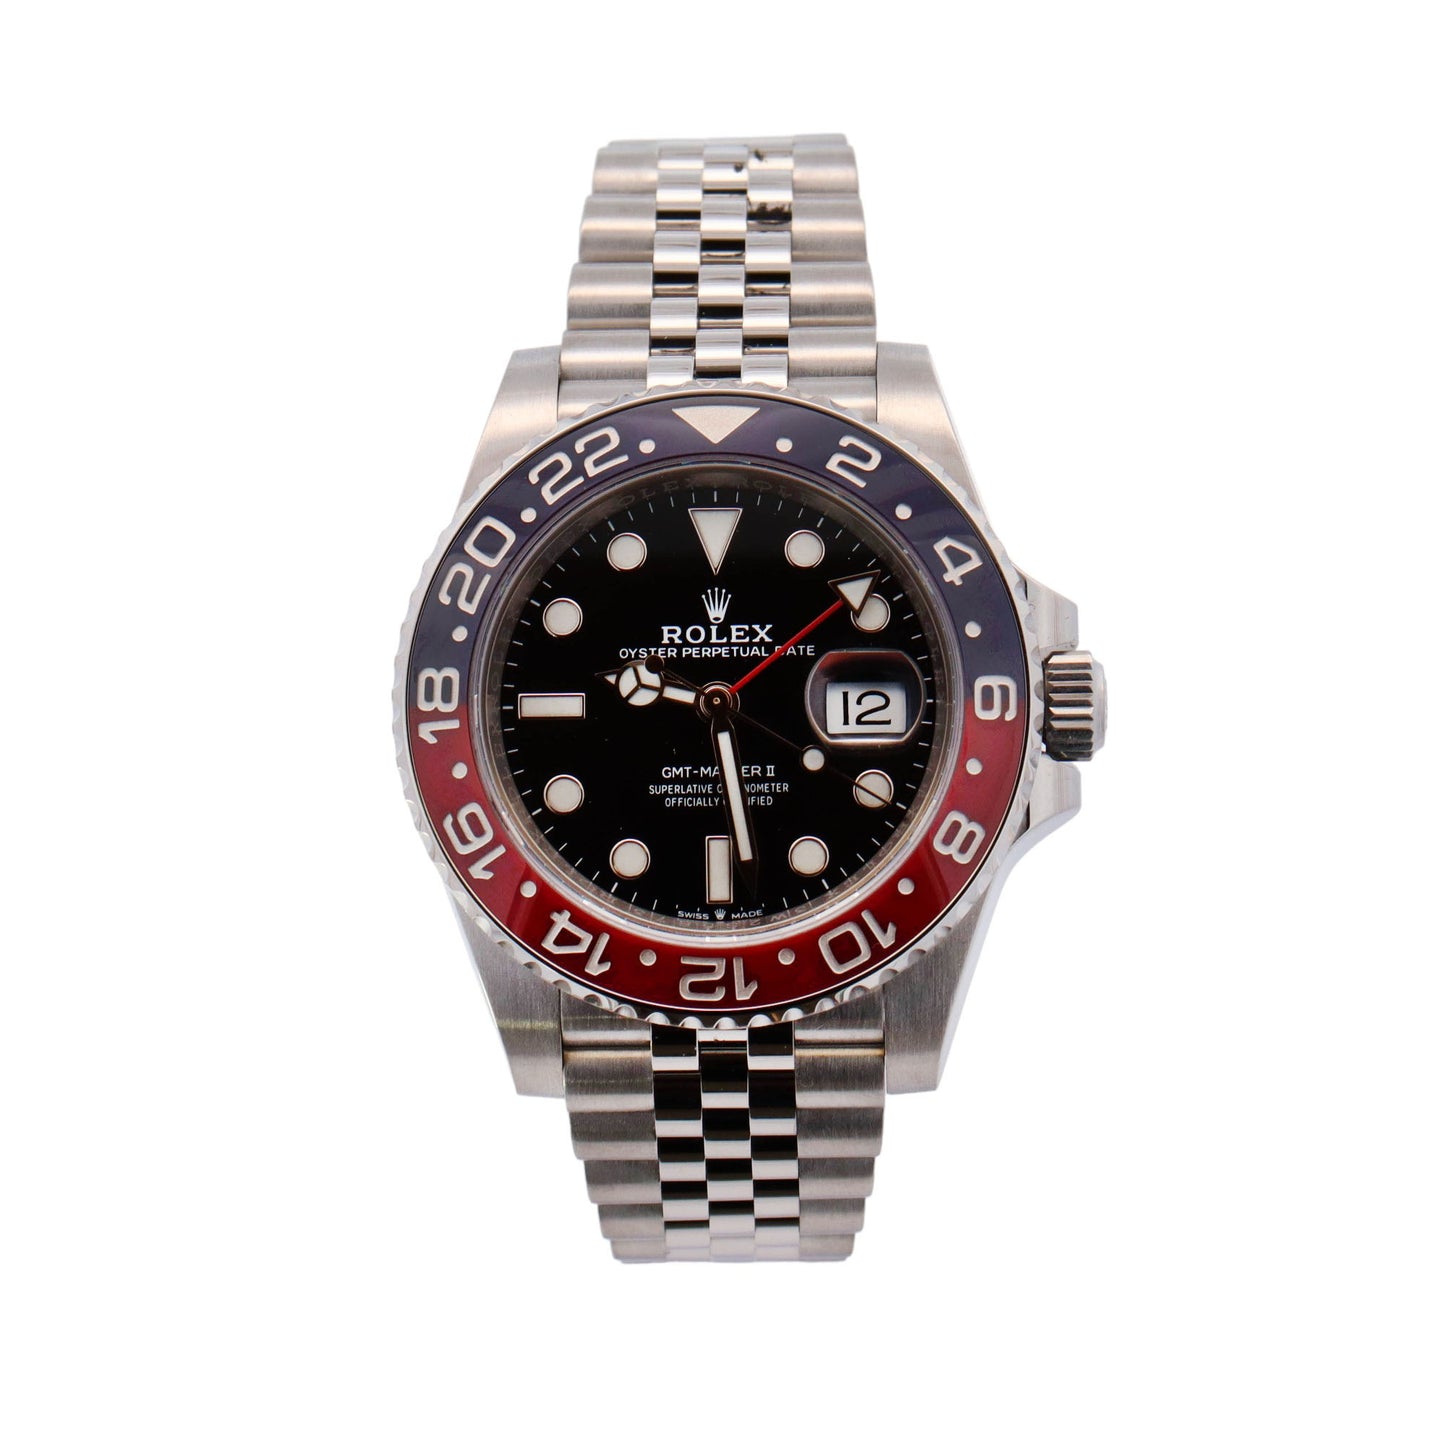 Rolex GMT Master "Pepsi" Stainless Steel 40mm Black Dot Dial Watch Reference#: 126710BLRO